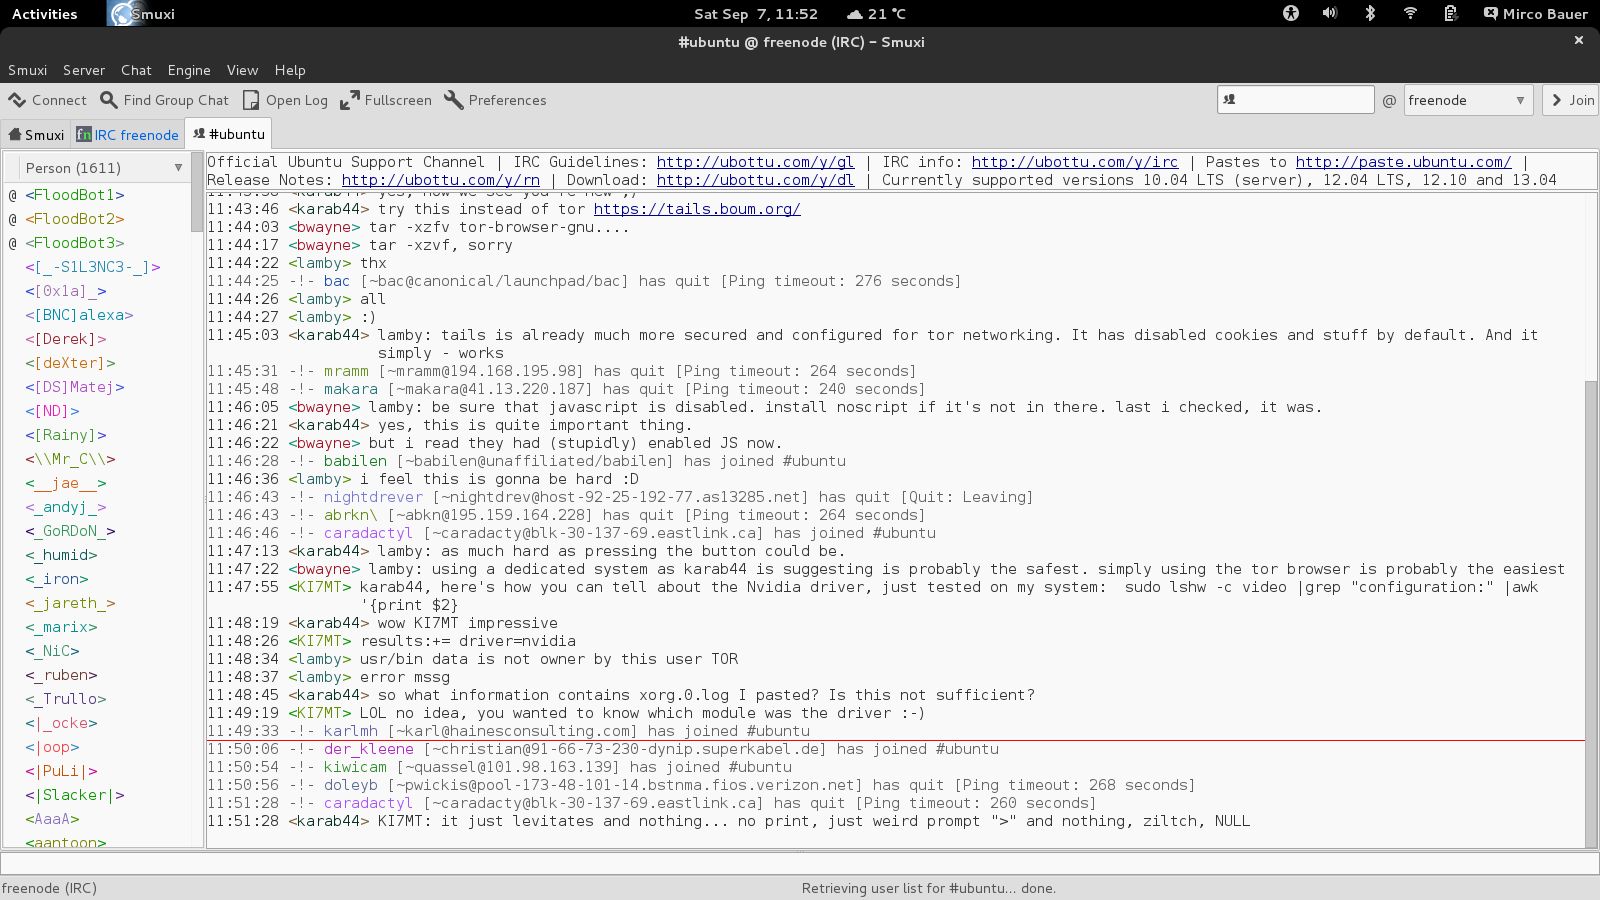 File:Smuxi-0.9-linux-gnome-main-window.png - Wikimedia Commons